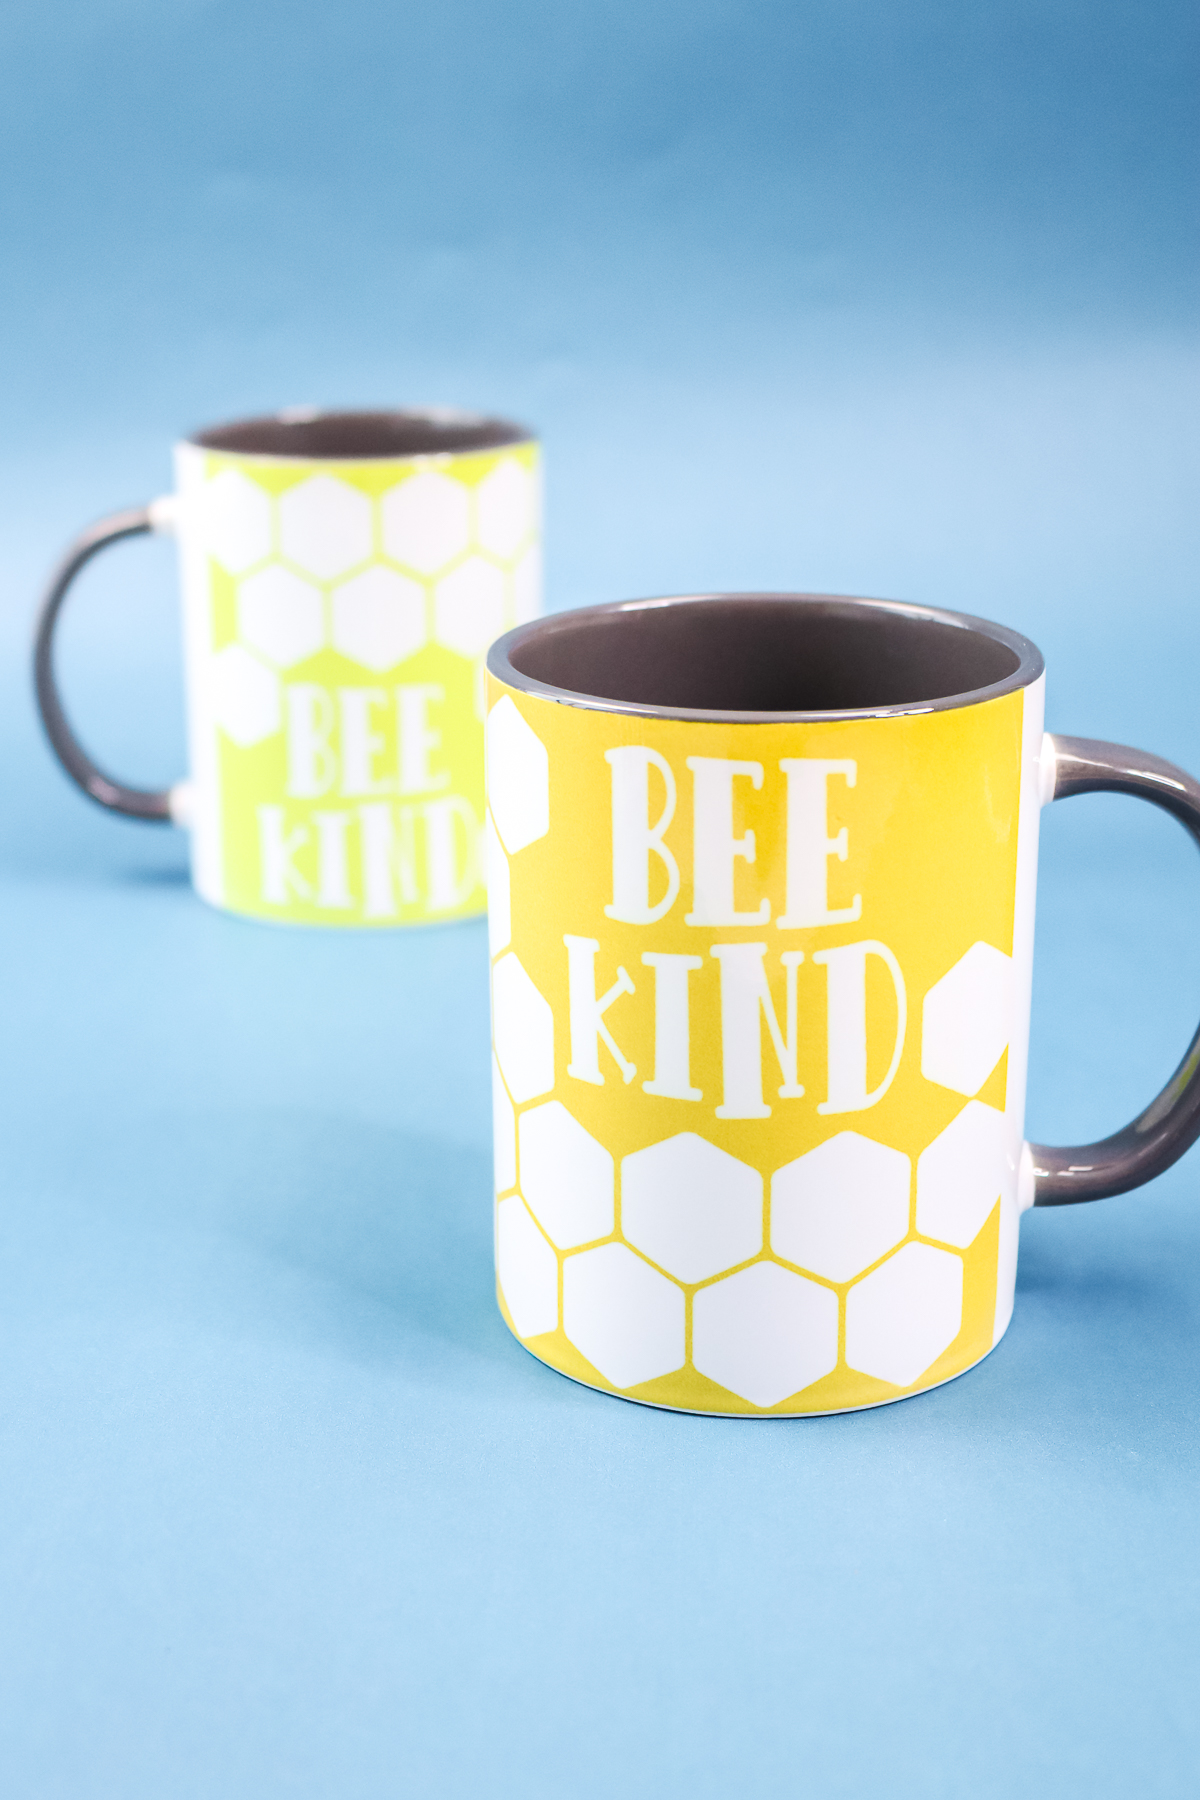 Sublimation Mugs - Ultimate DIY Guide - Pineapple Paper Co.